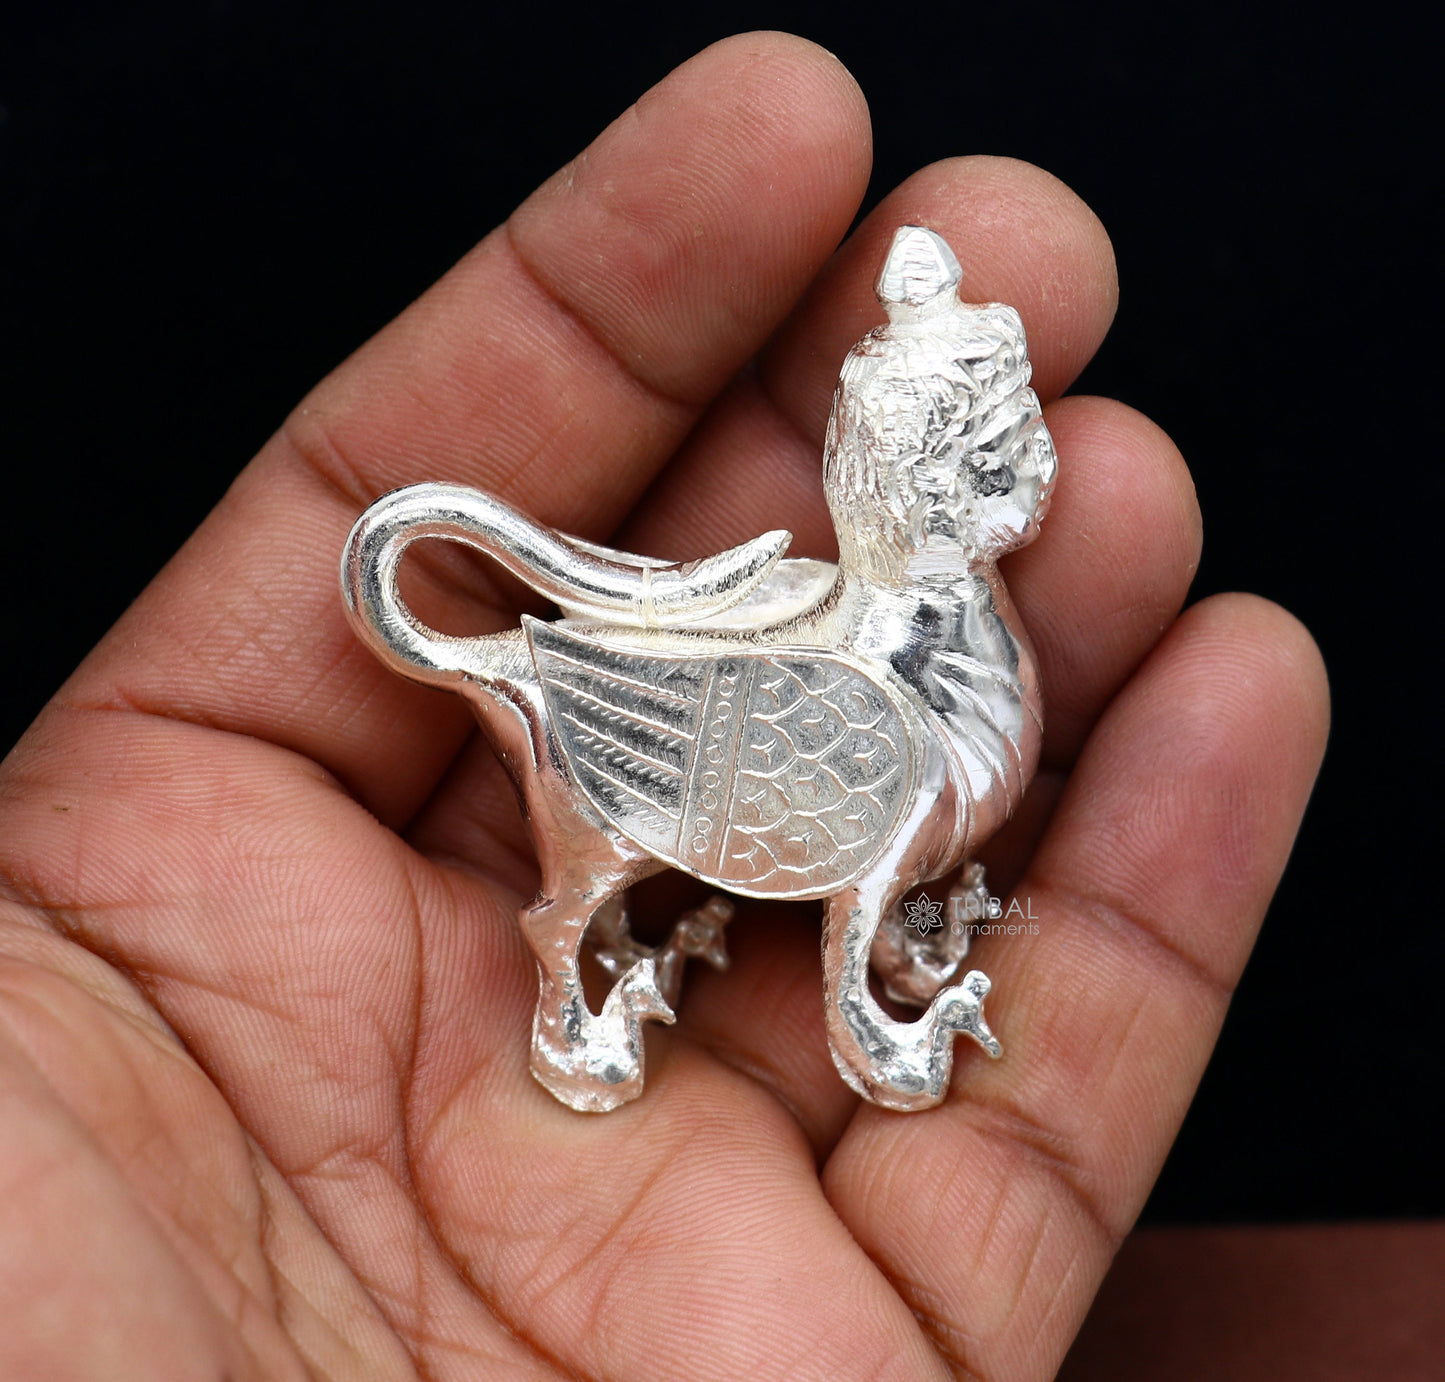 925 sterling silver Divine Kamdhenu cow, deity's cow, wishing cow, silver worshipping puja article from india art637 - TRIBAL ORNAMENTS